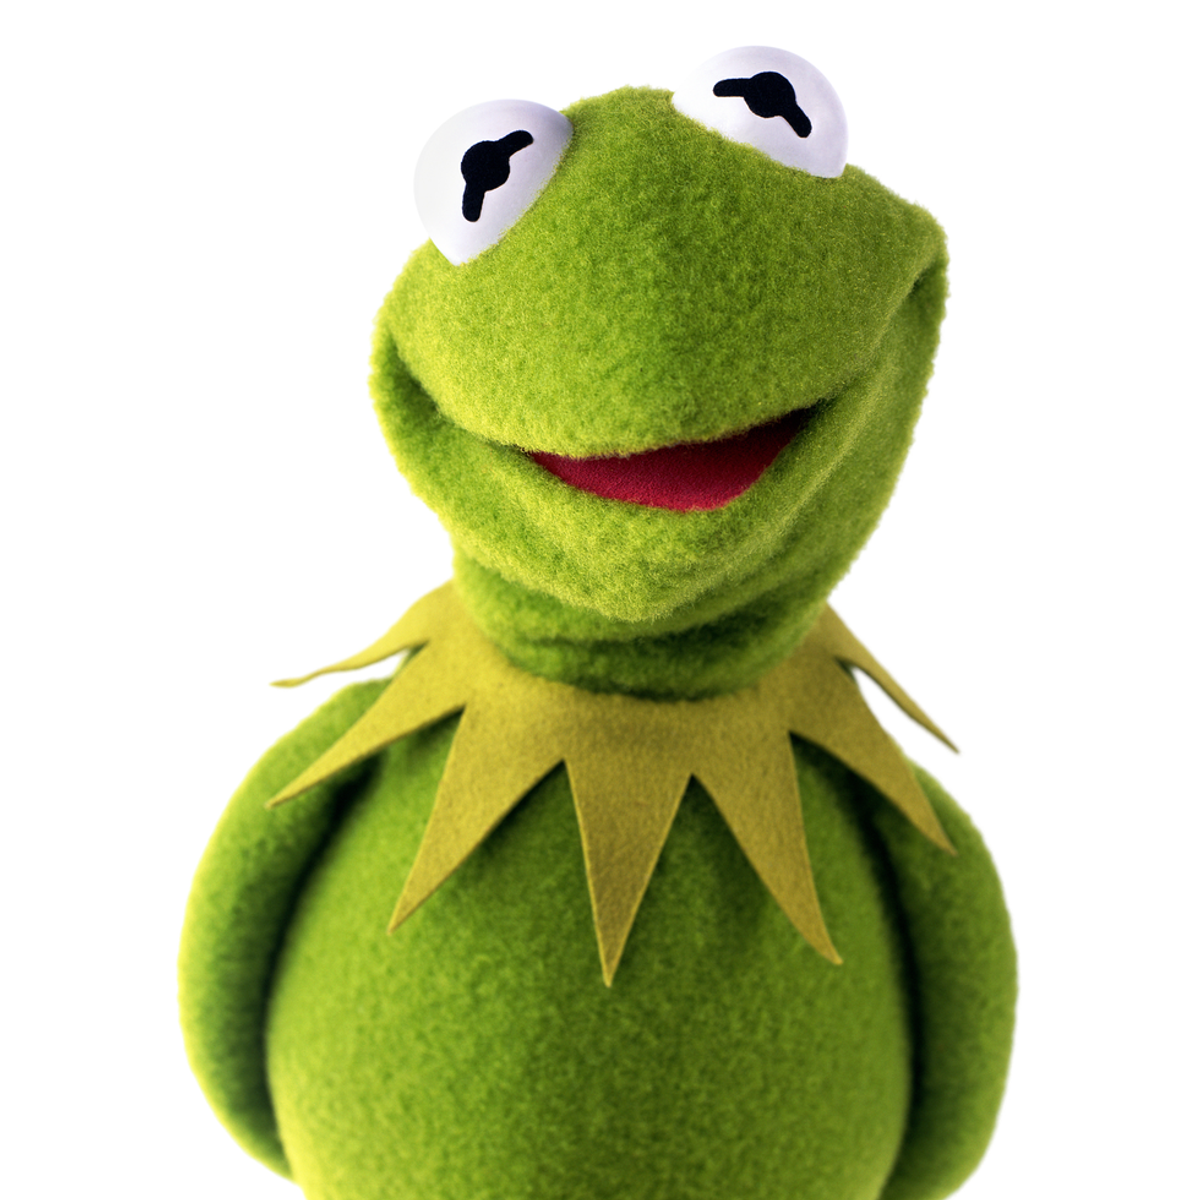 10 Times Kermit The Frog Hit The Nail On The Head